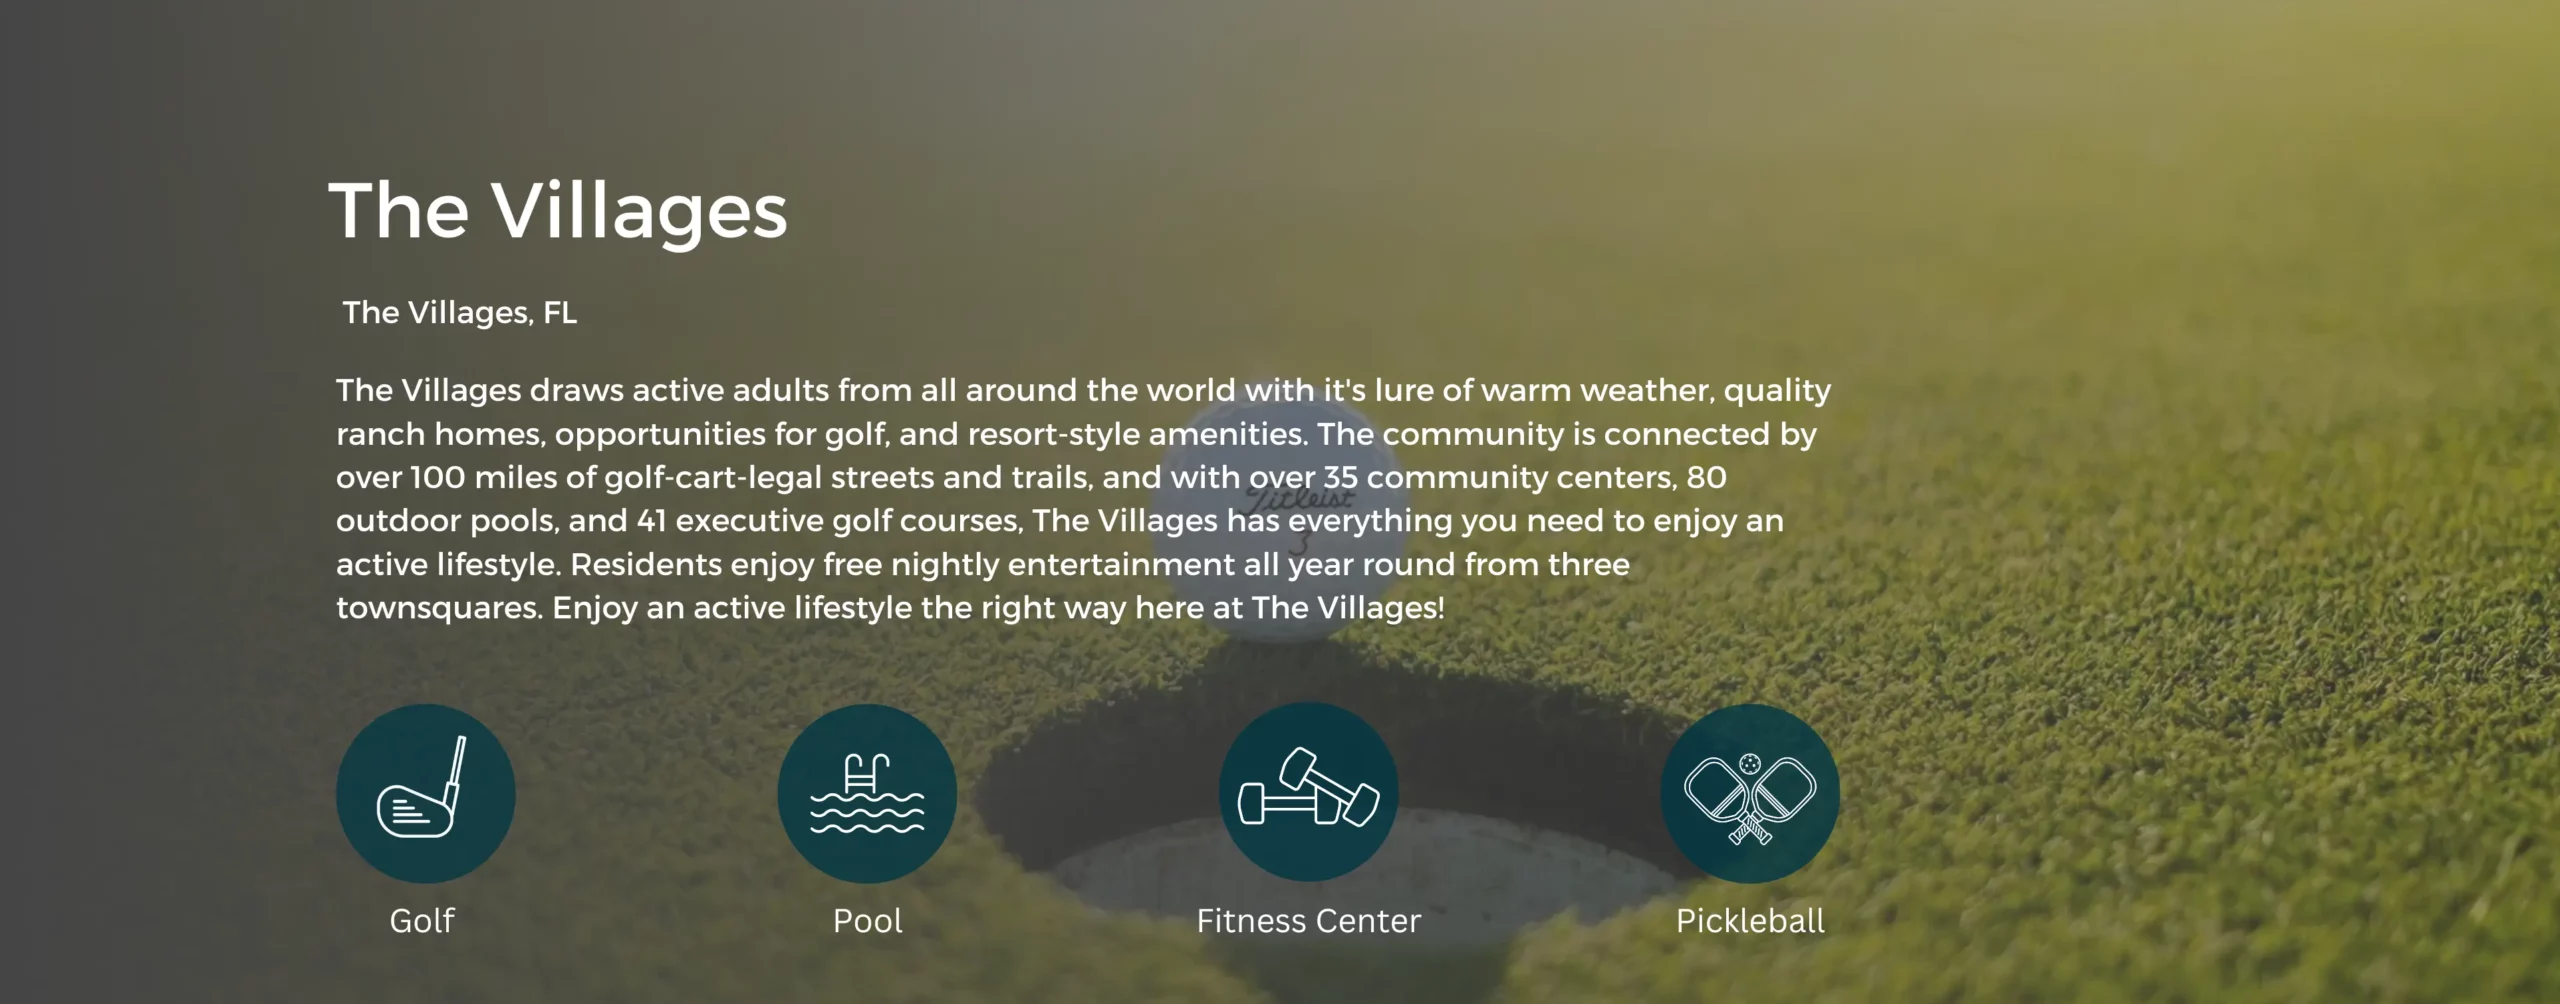 Icons that show Golf, Pool, Fitness Center, and Pickleball. Background image is a golf ball on a golf course.